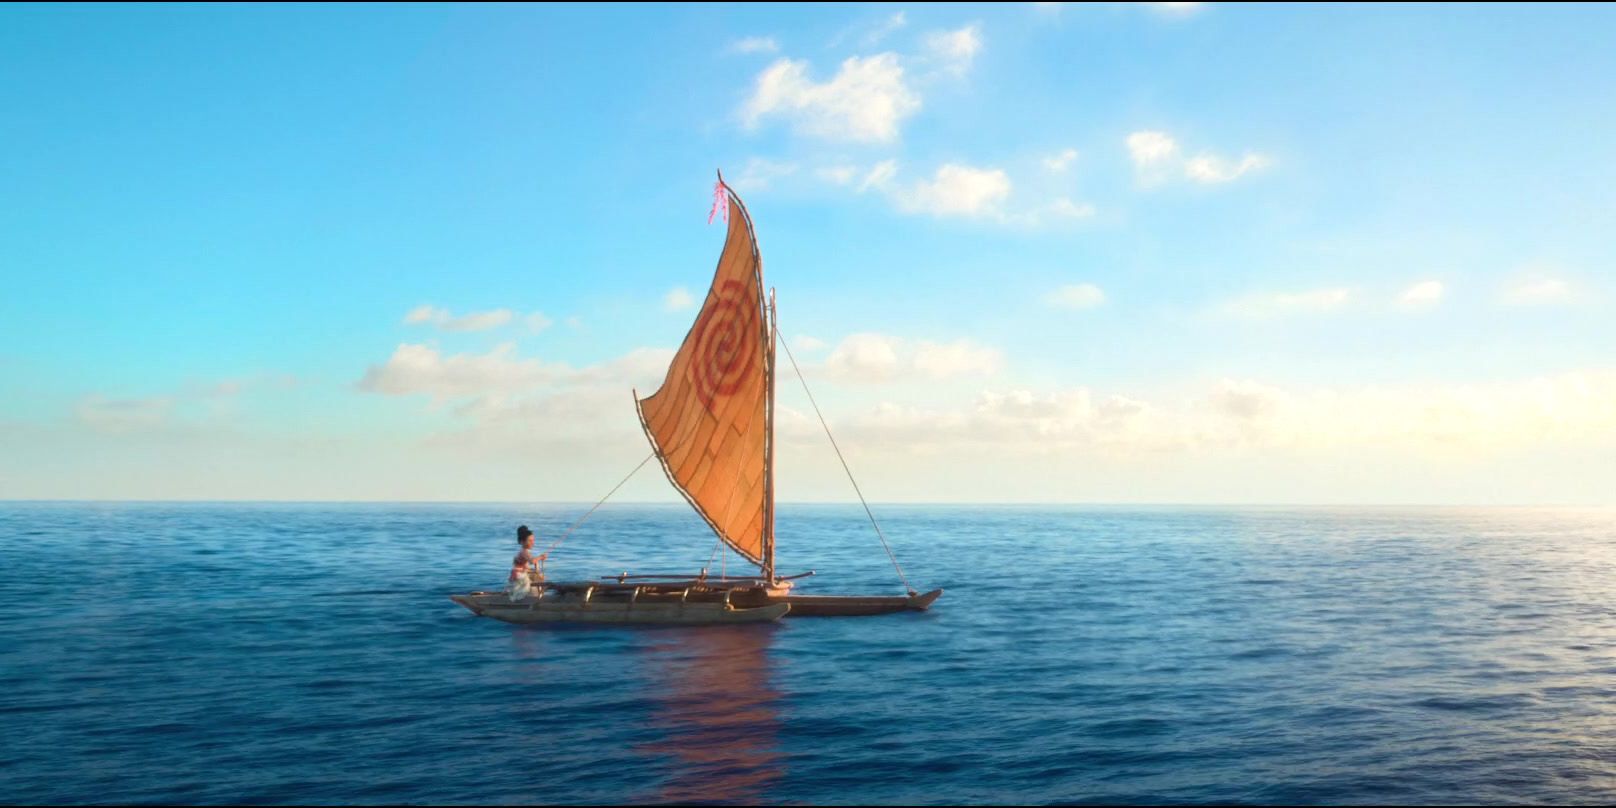 Moana on her boat surrounded by ocean in Moana